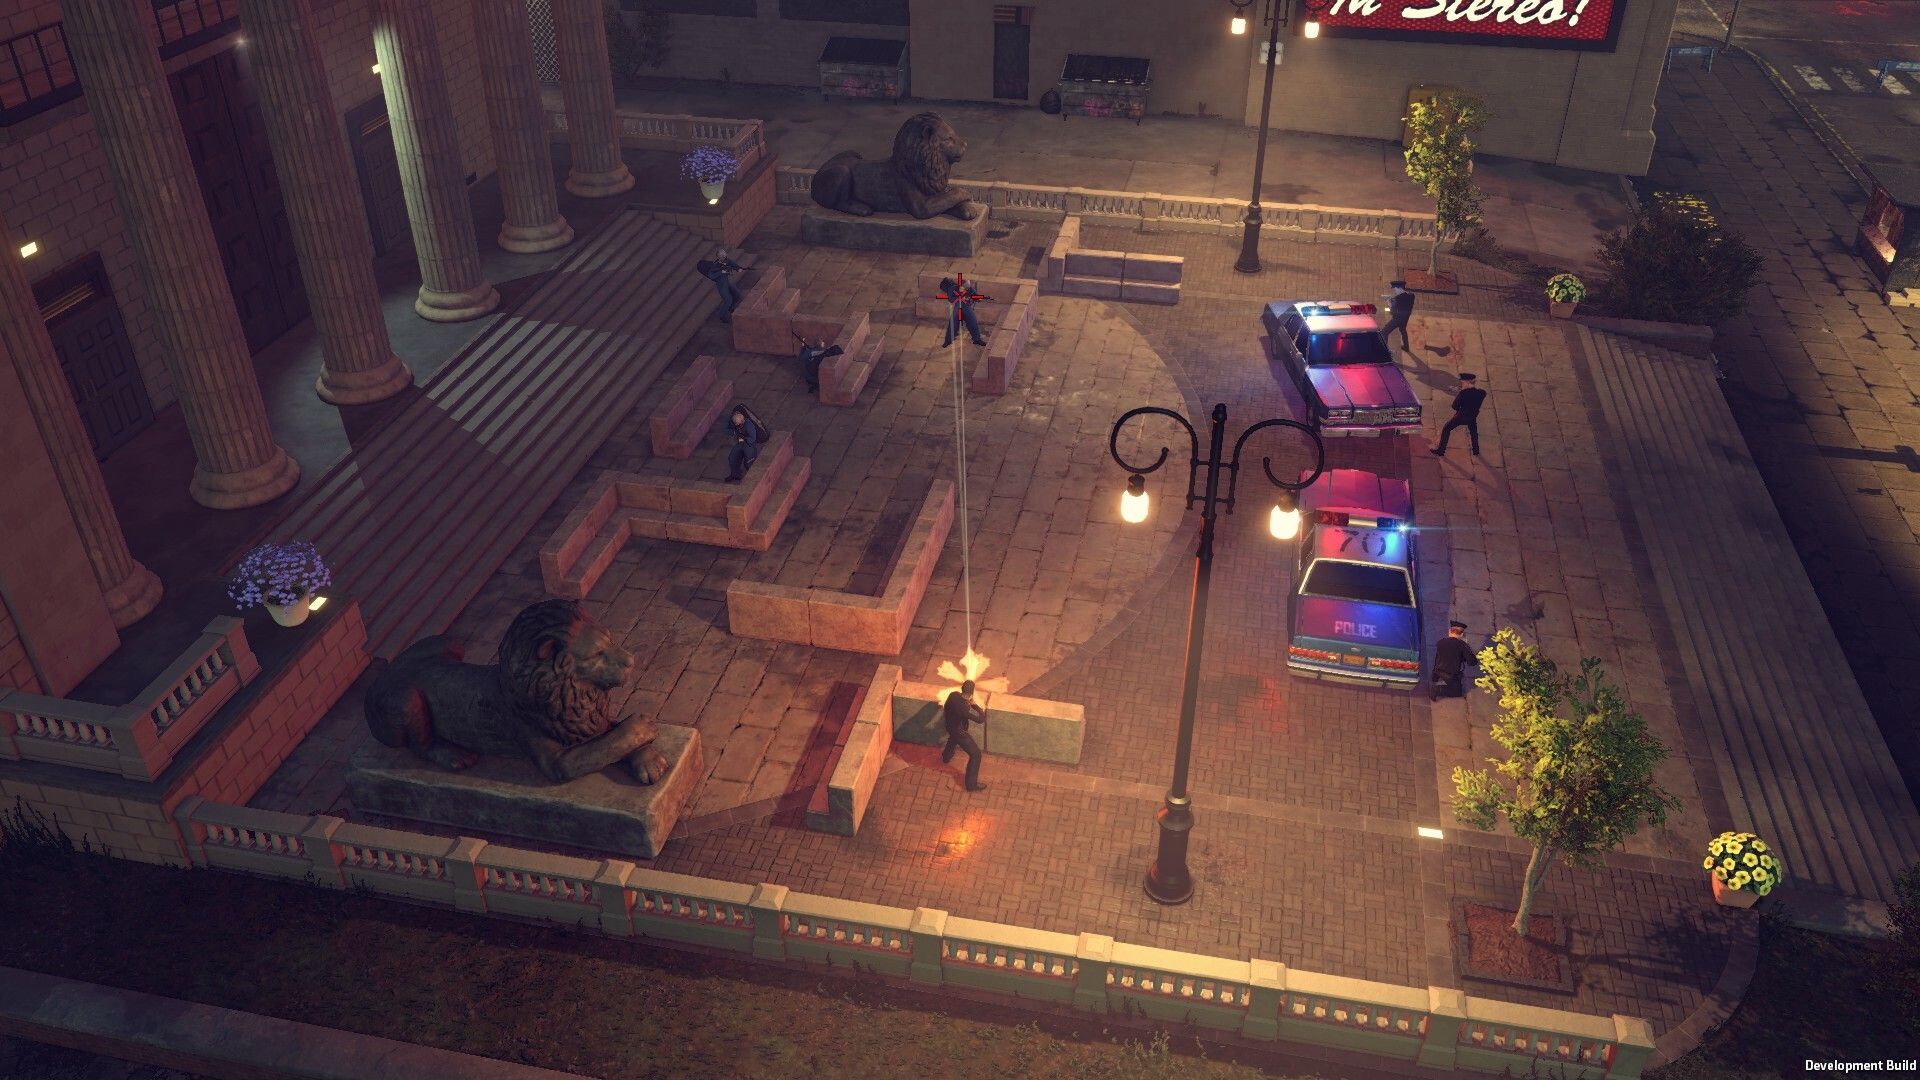 The Precinct is a 1980s Noir Action Game About Being a Rookie Cop